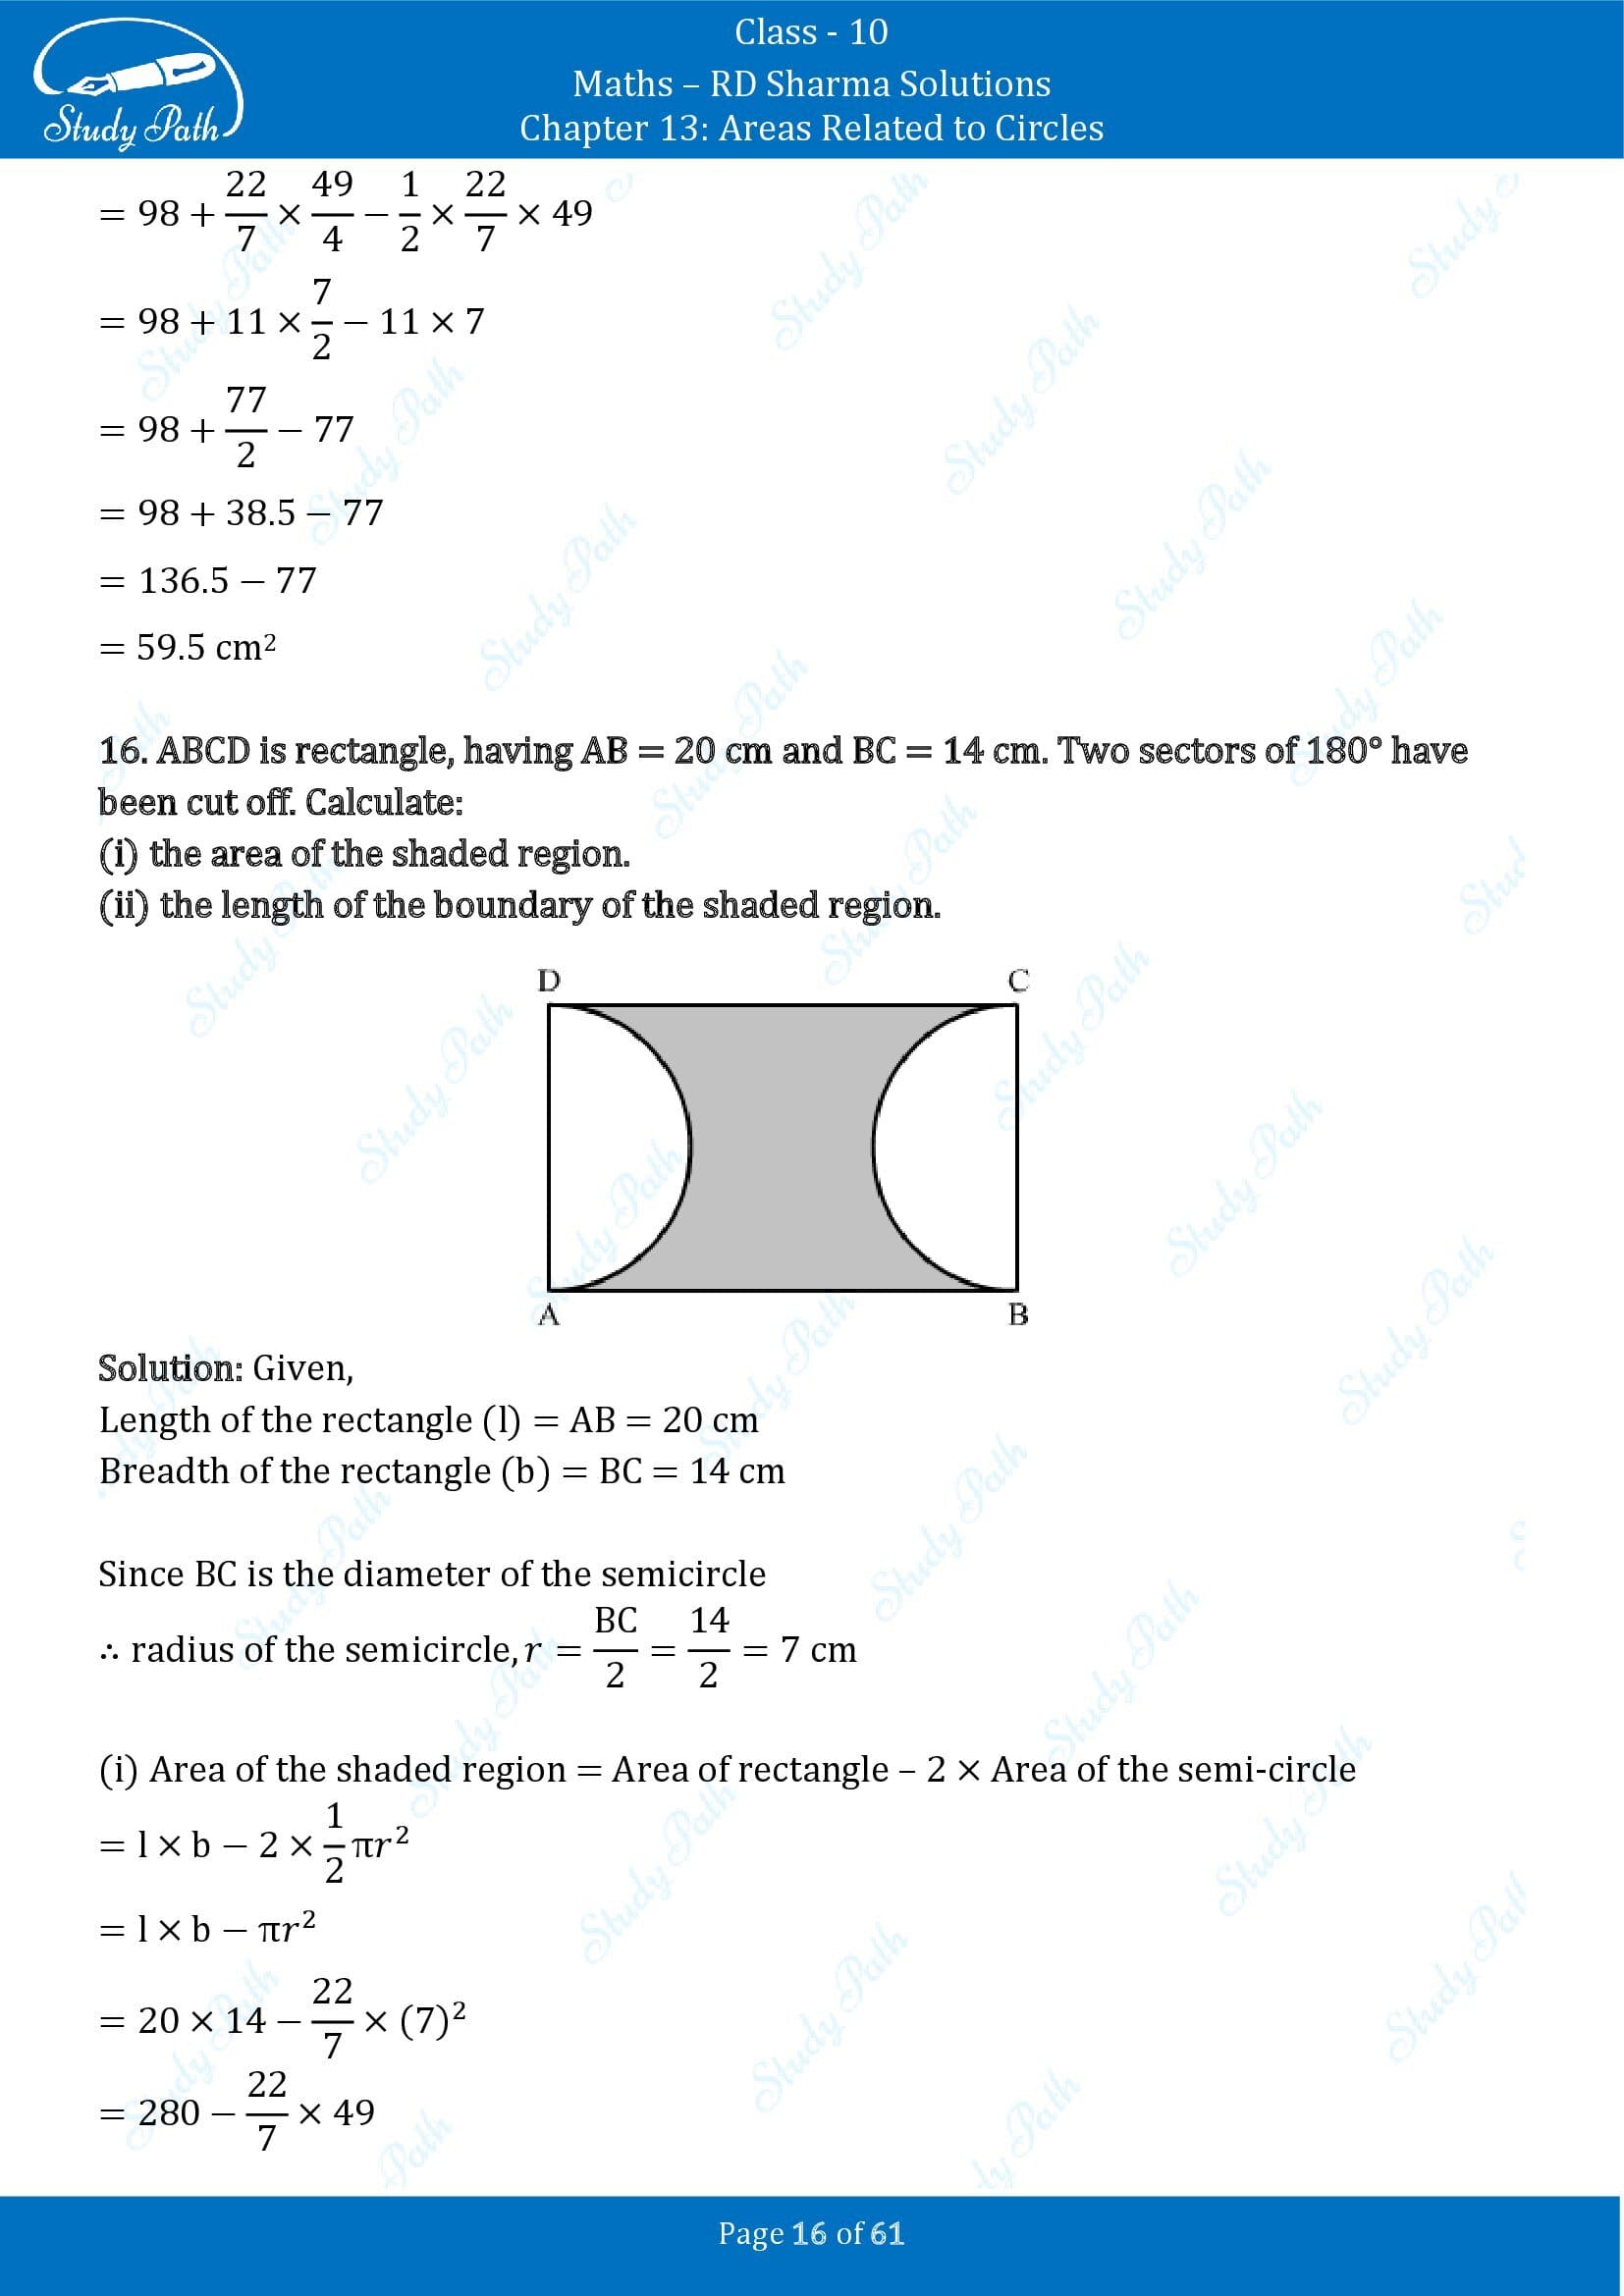 RD Sharma Solutions Class 10 Chapter 13 Areas Related to Circles Exercise 13.4 00016